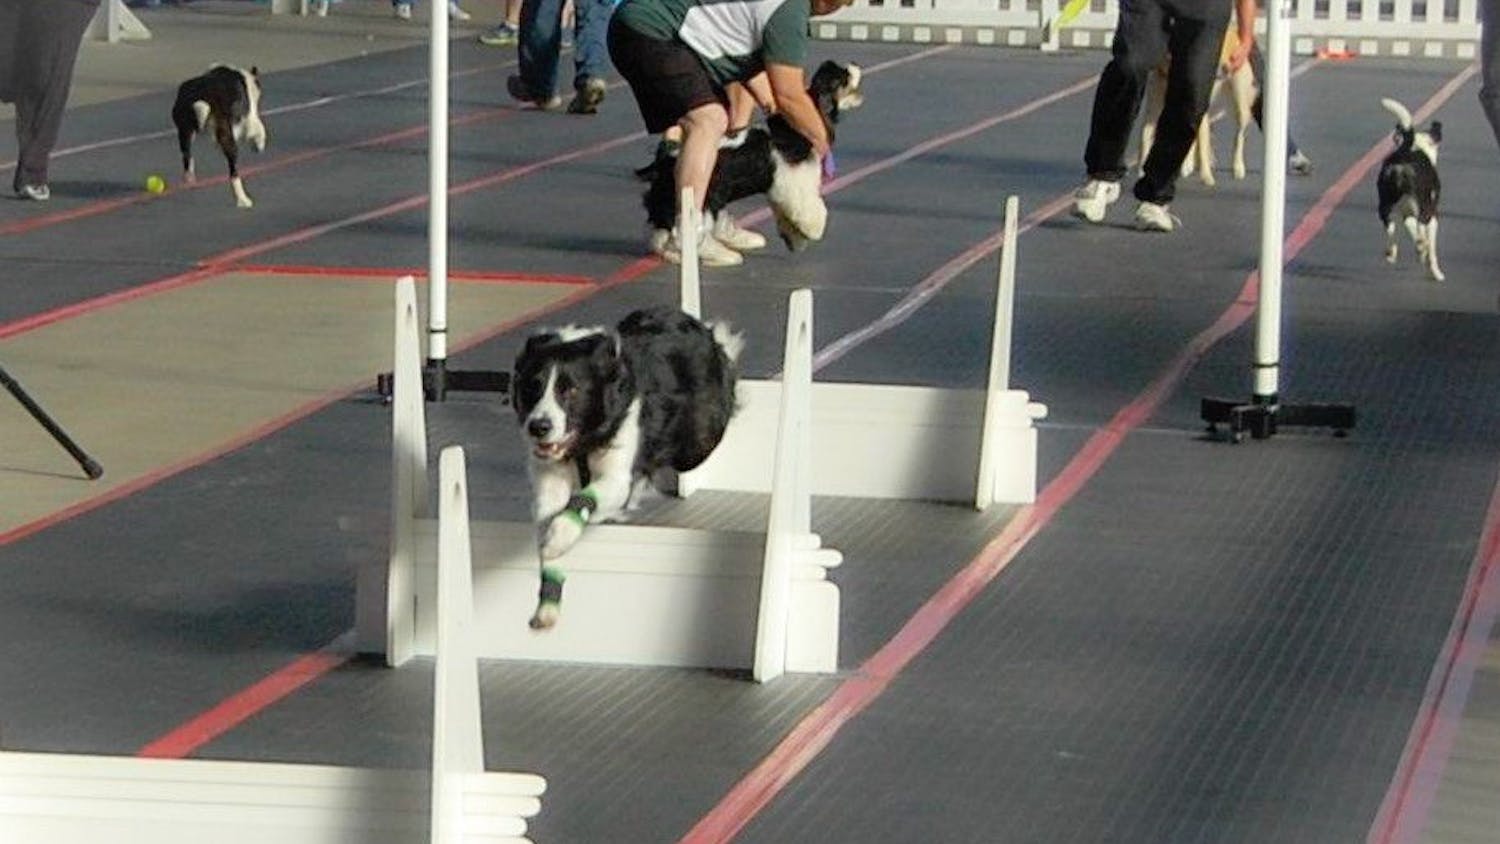 As trainers prepare the next dog behind the start/finish line, a dog leaps one of four hurdles on the 51-foot flyball track.&nbsp;